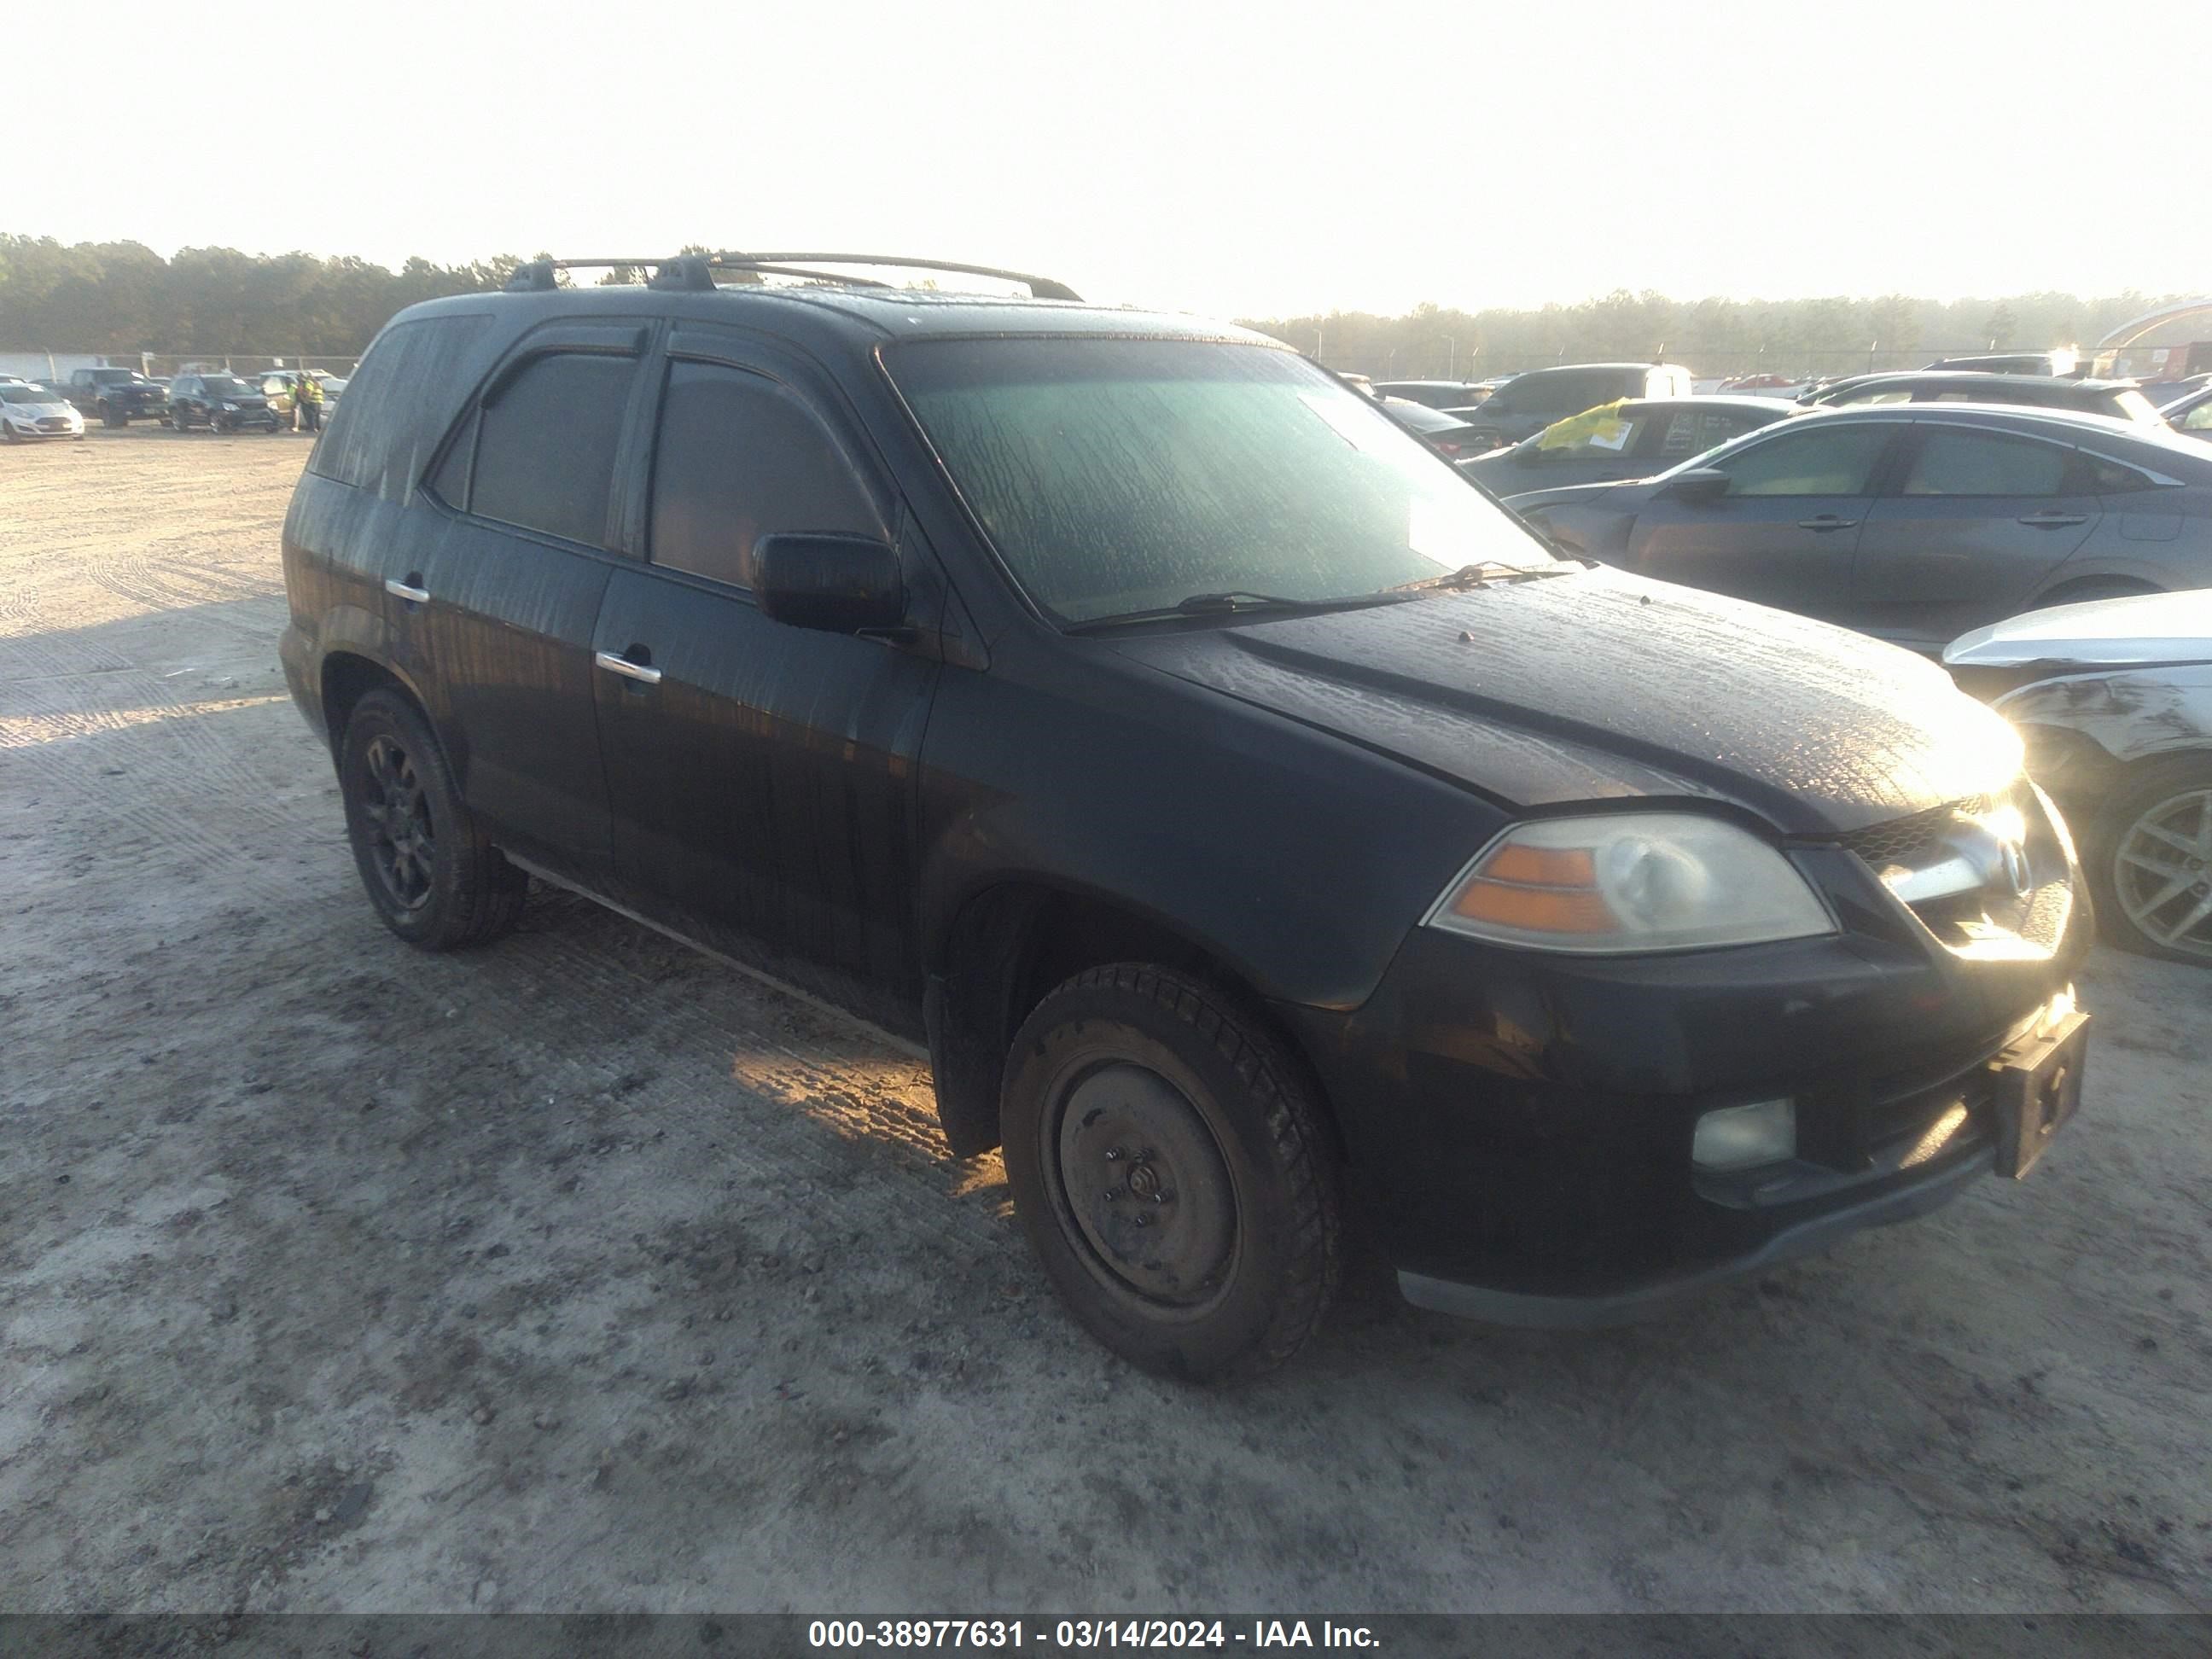 vin: 2HNYD189X5H509266 2HNYD189X5H509266 2005 acura mdx 3500 for Sale in 31326, 348 Commerce Dr, Rincon, USA